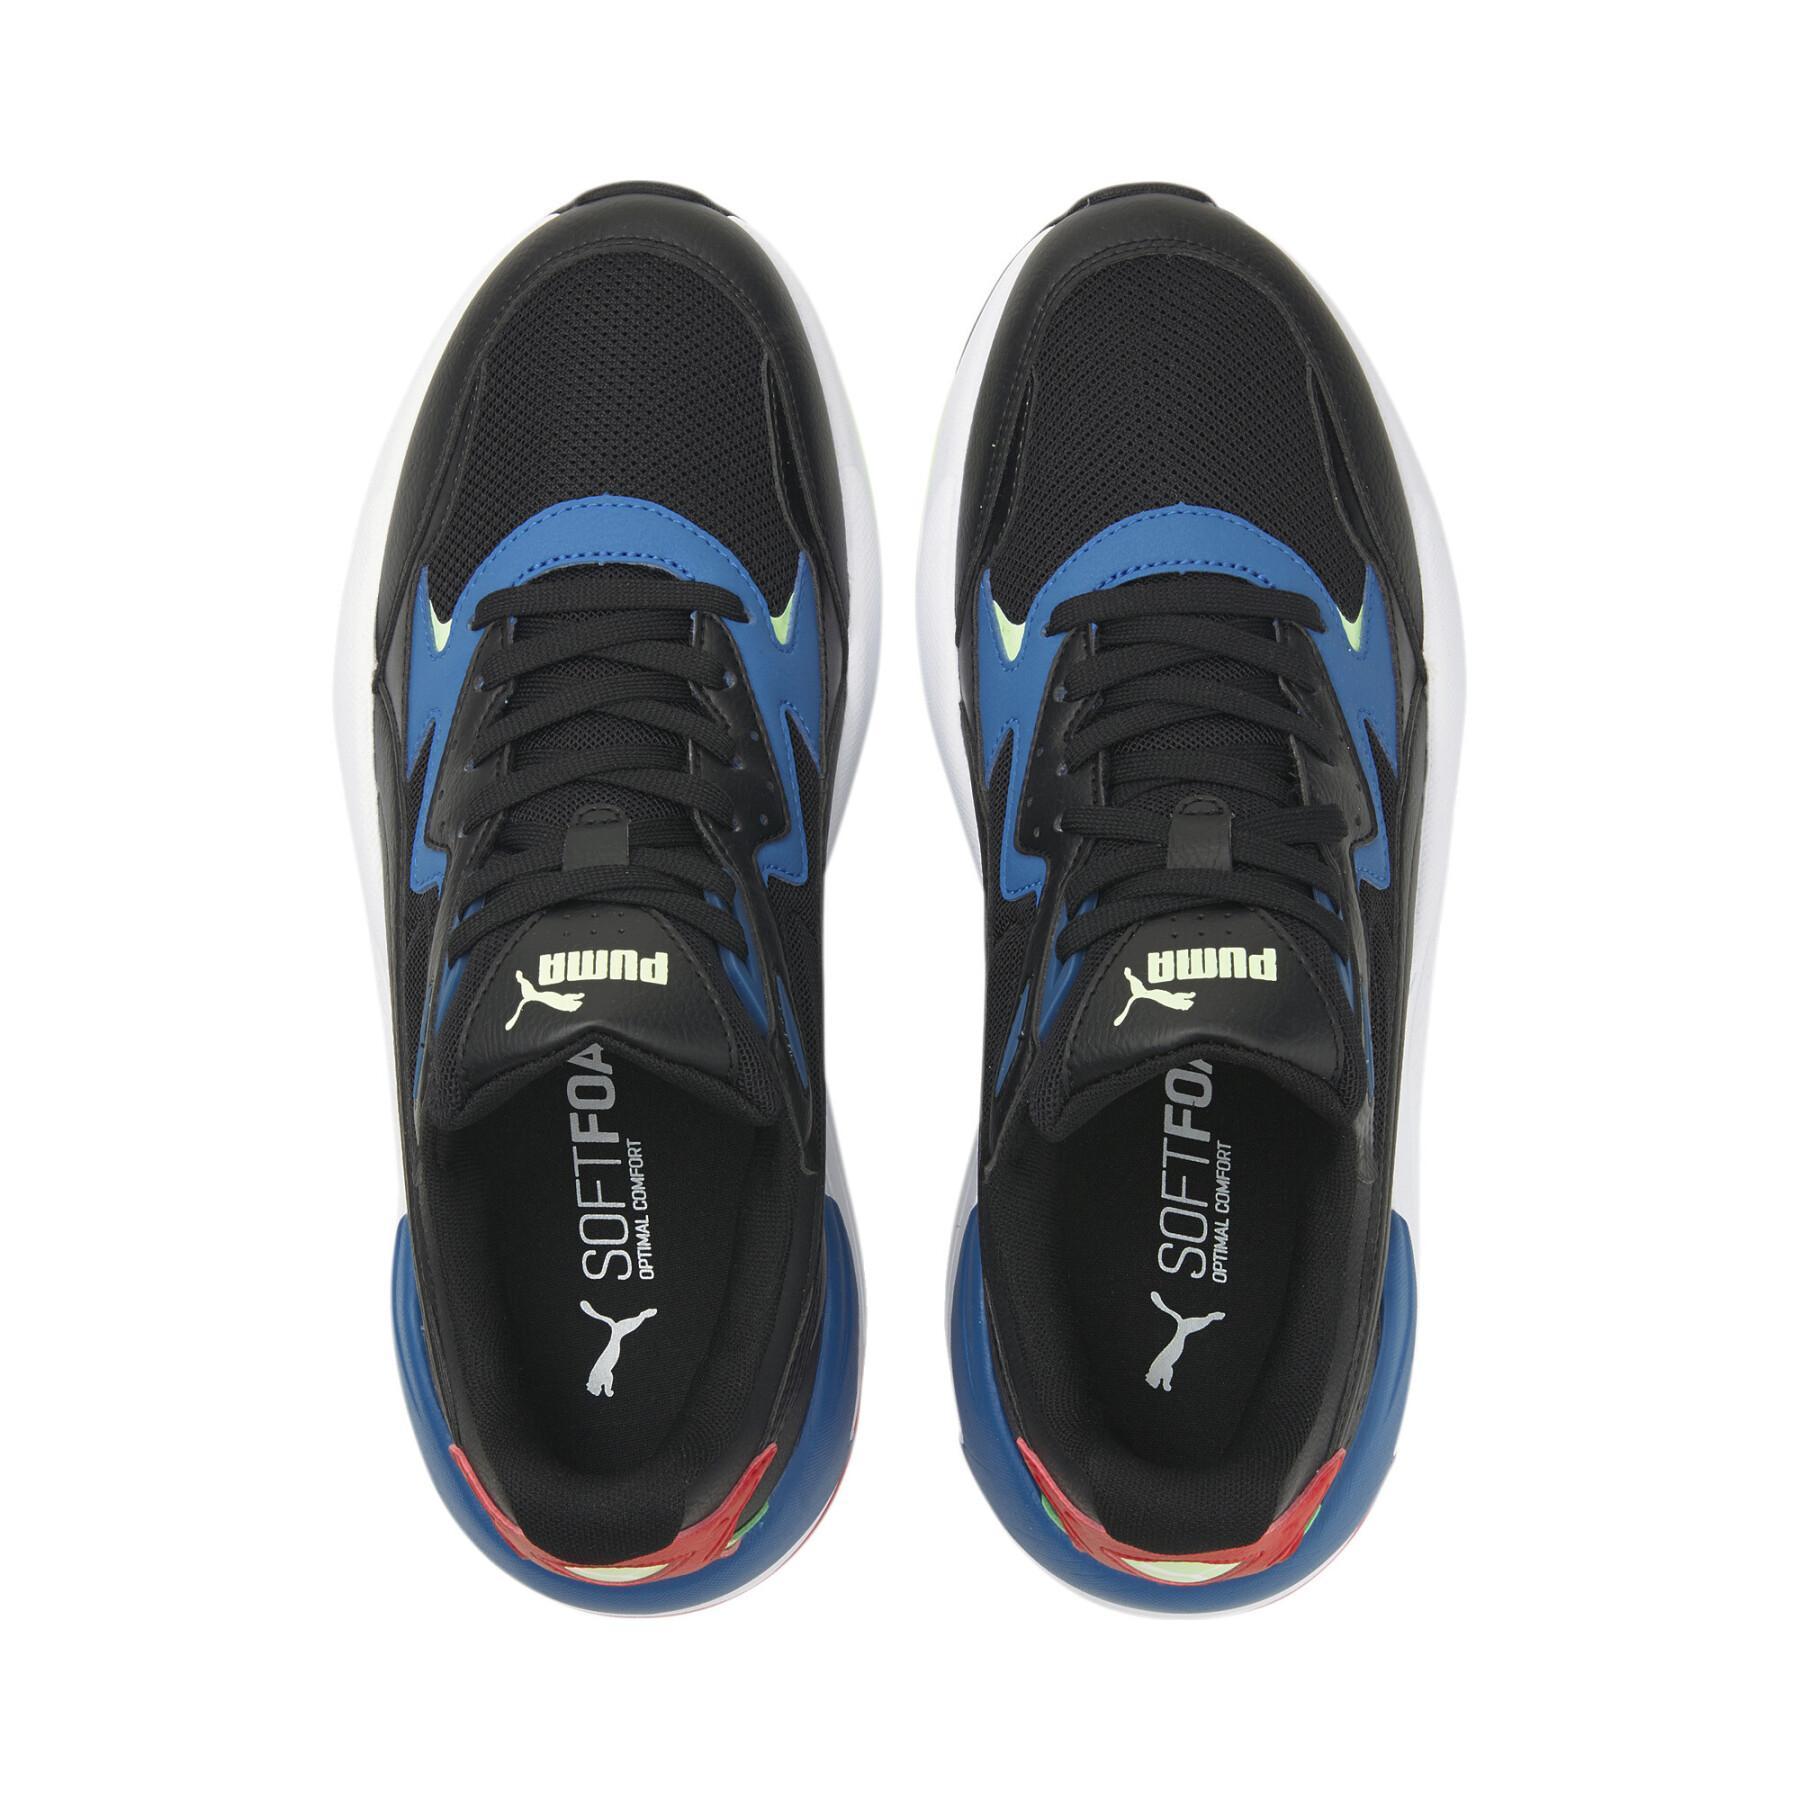 Formadores Puma X-Ray Speed